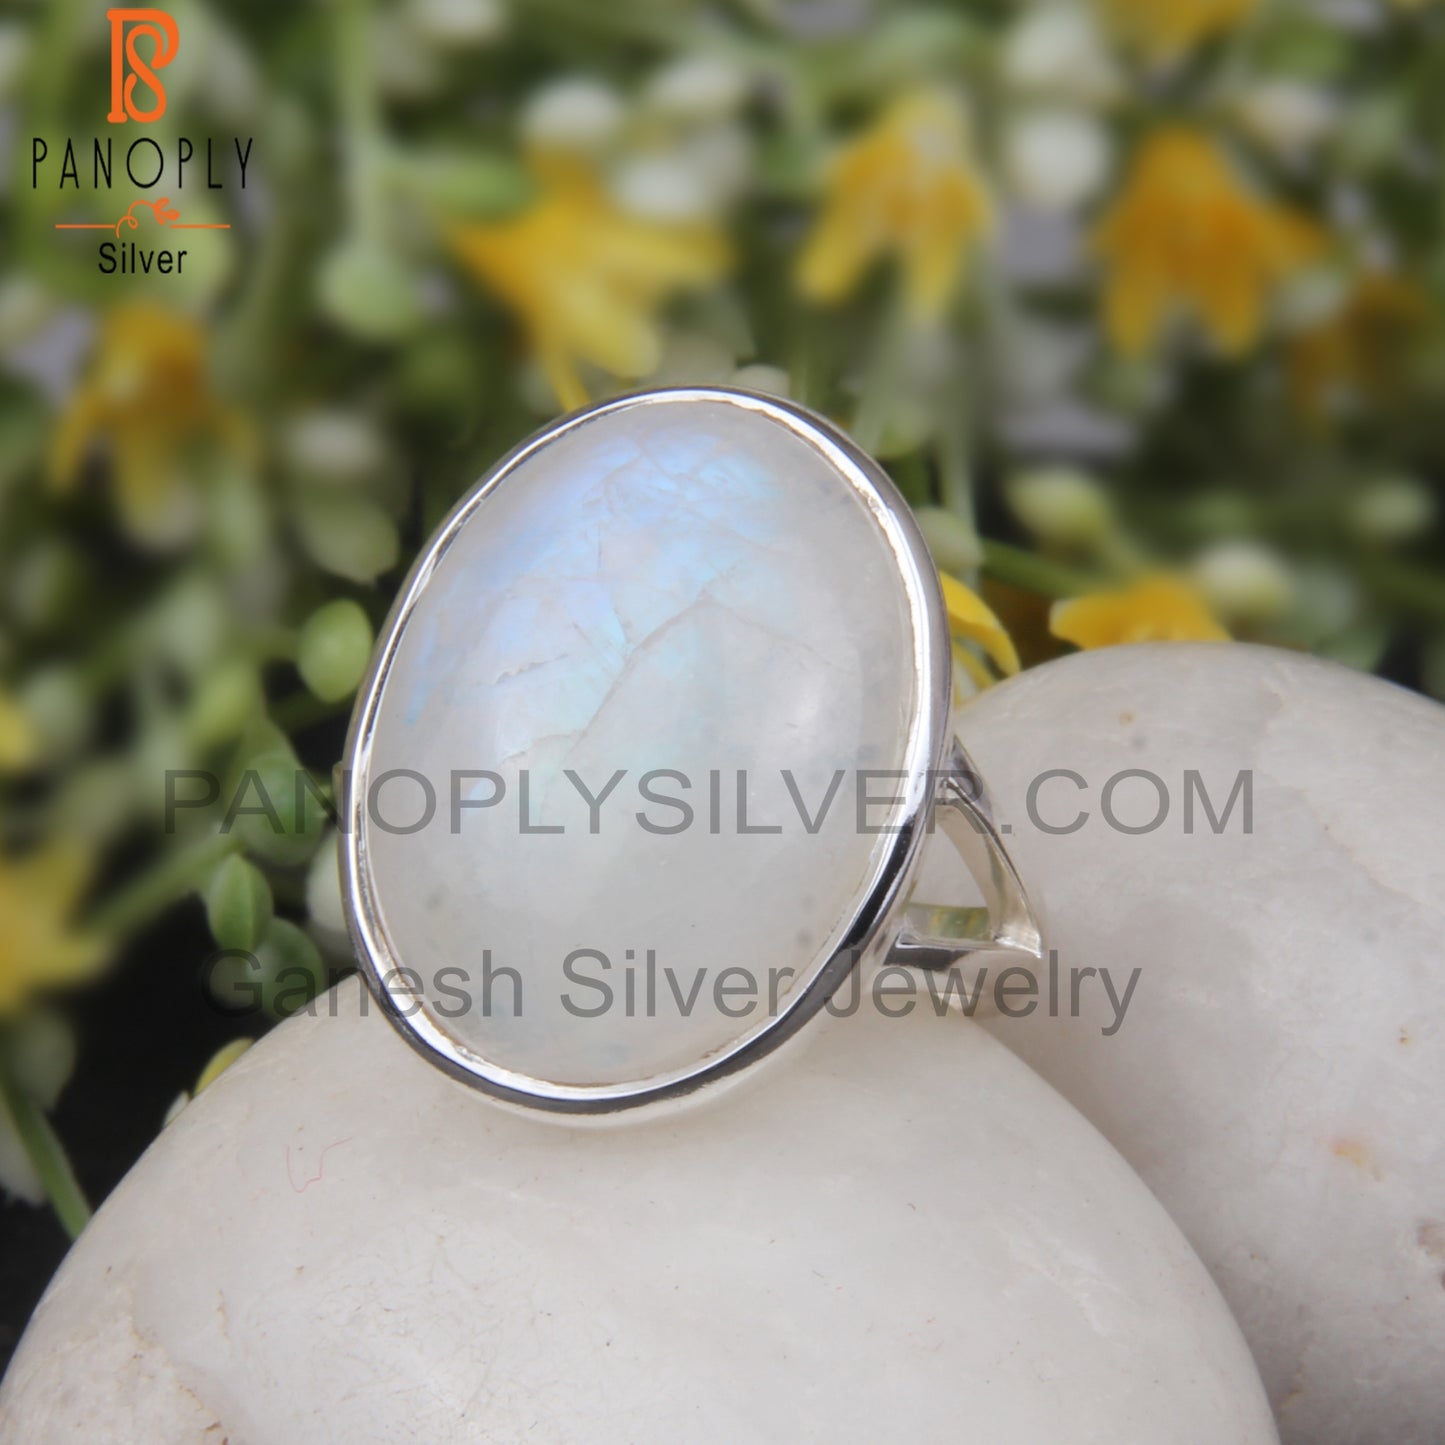 Rainbow Moonstone Cabochon Oval Shape Sterling Silver 925 Ring